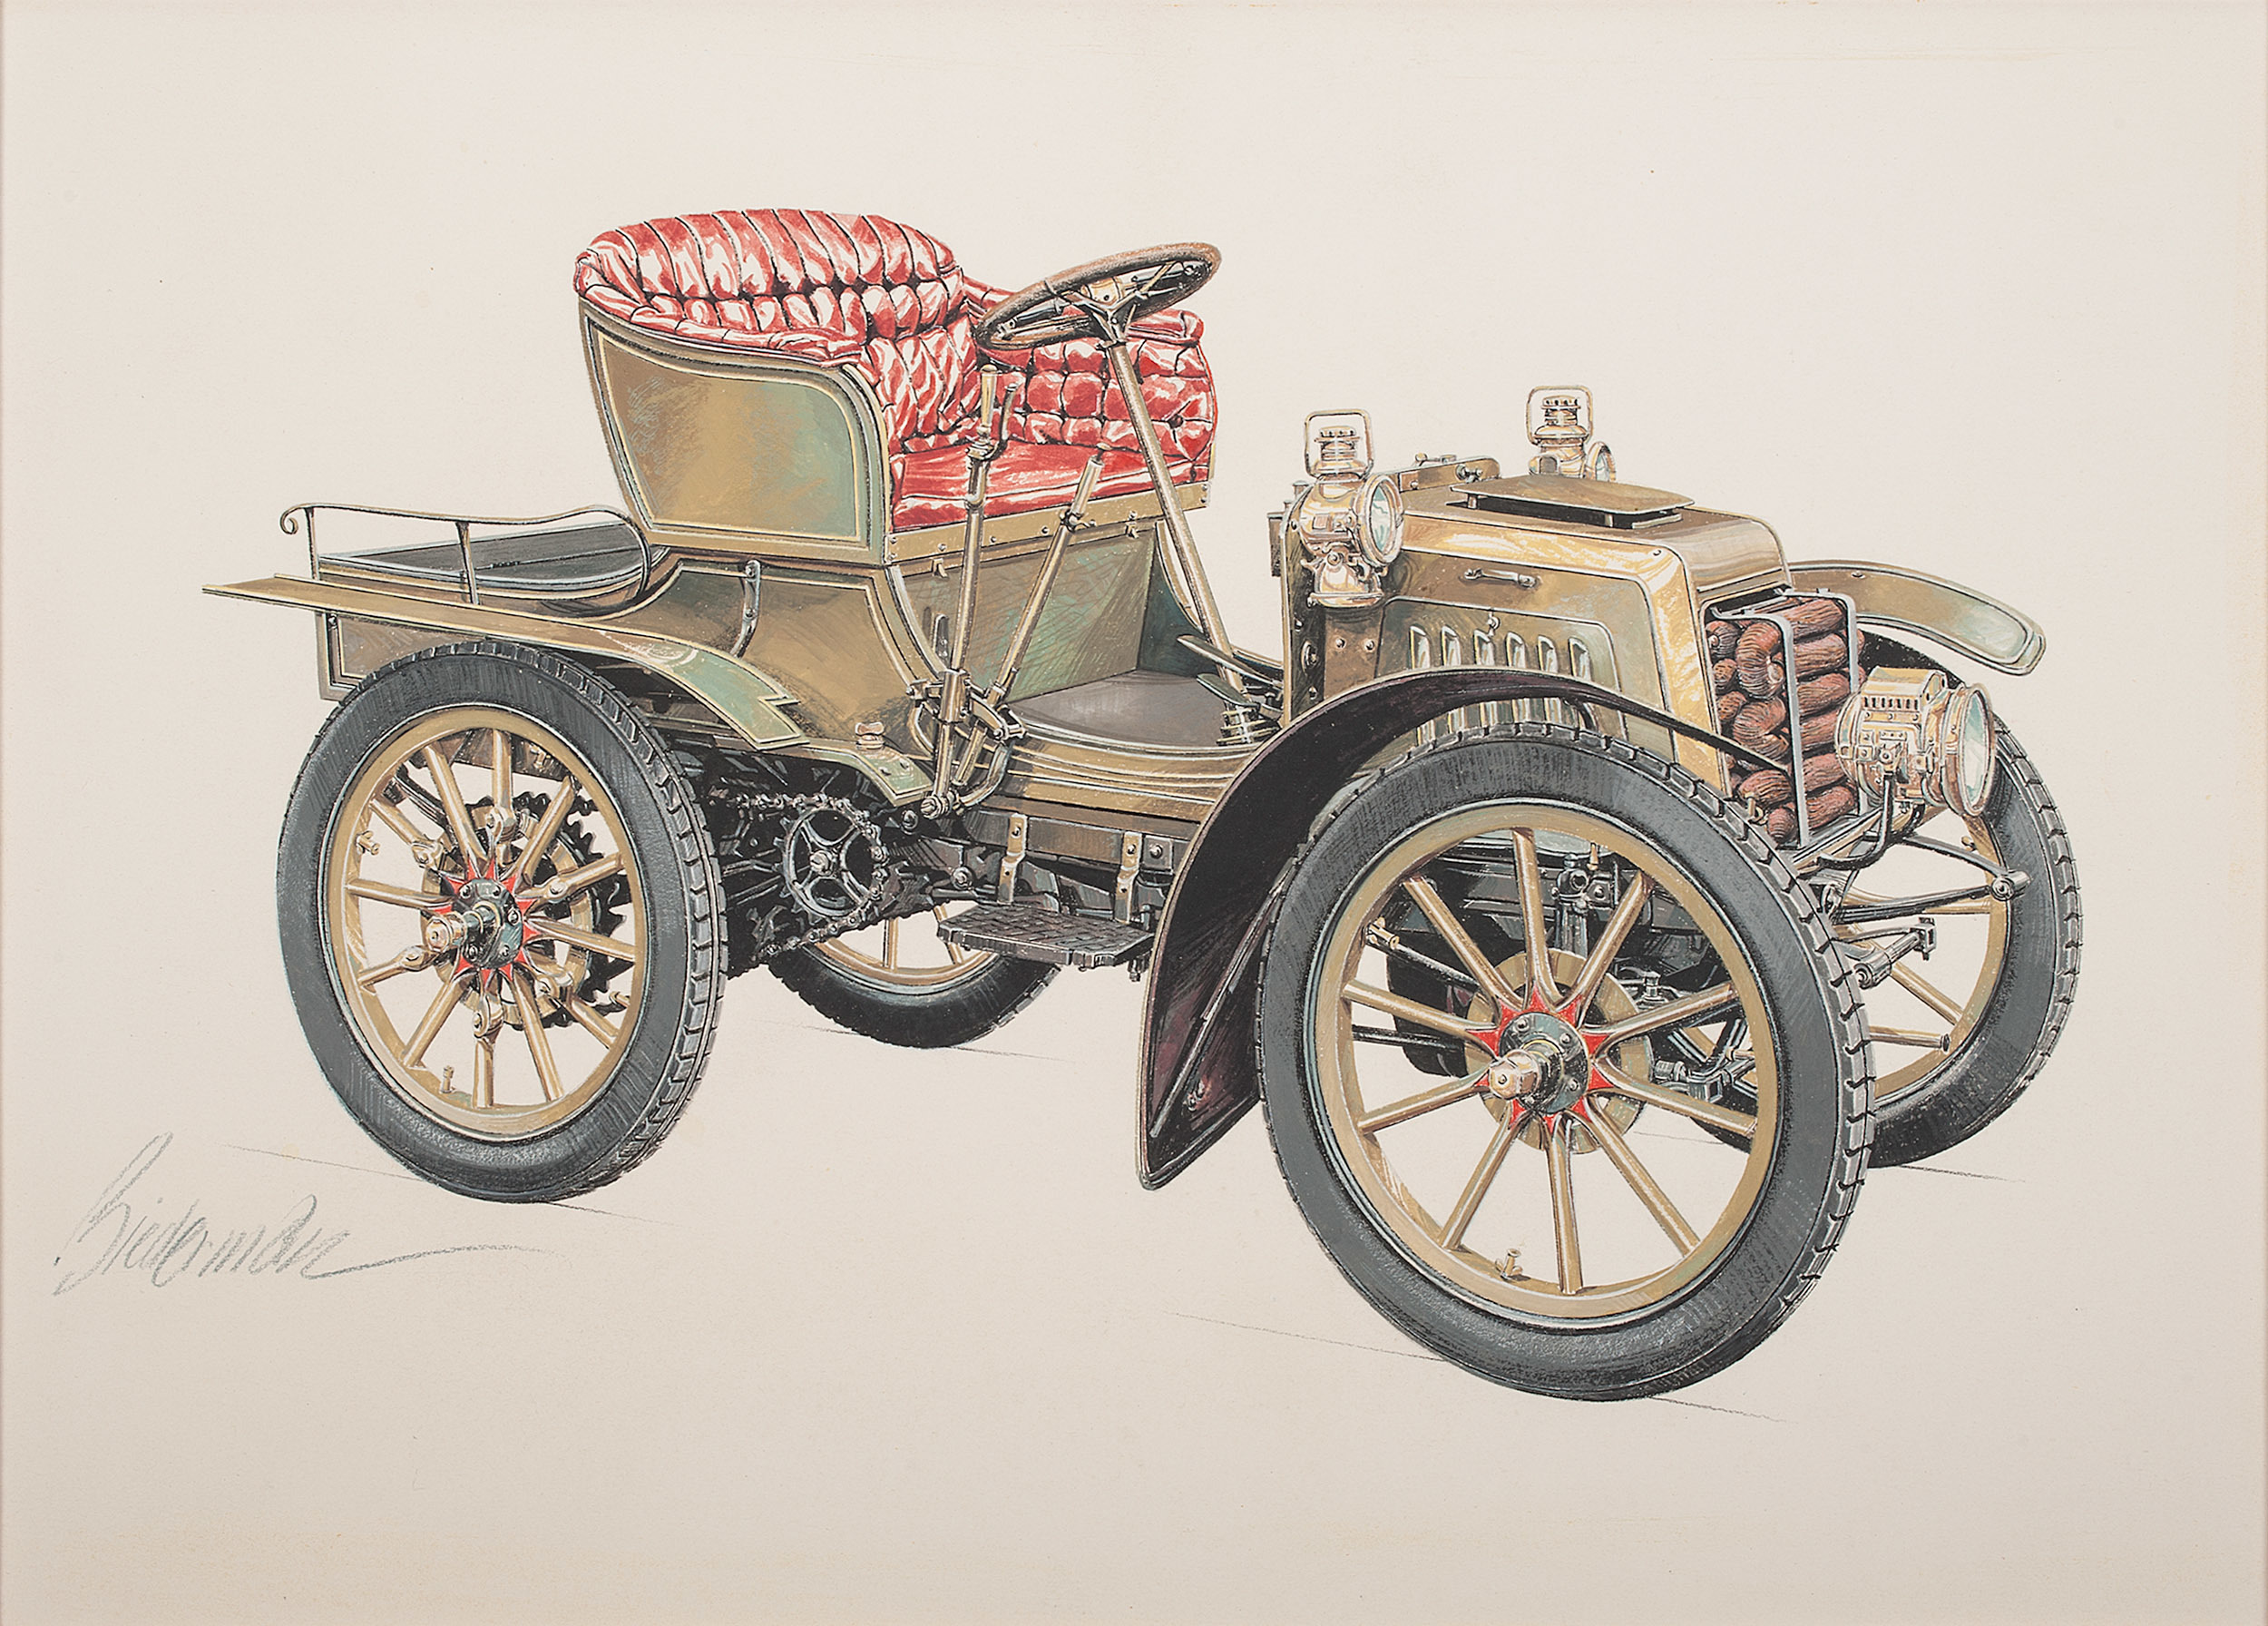 1902 Panhard Runabout: Illustrated by Jerome D. Biederman